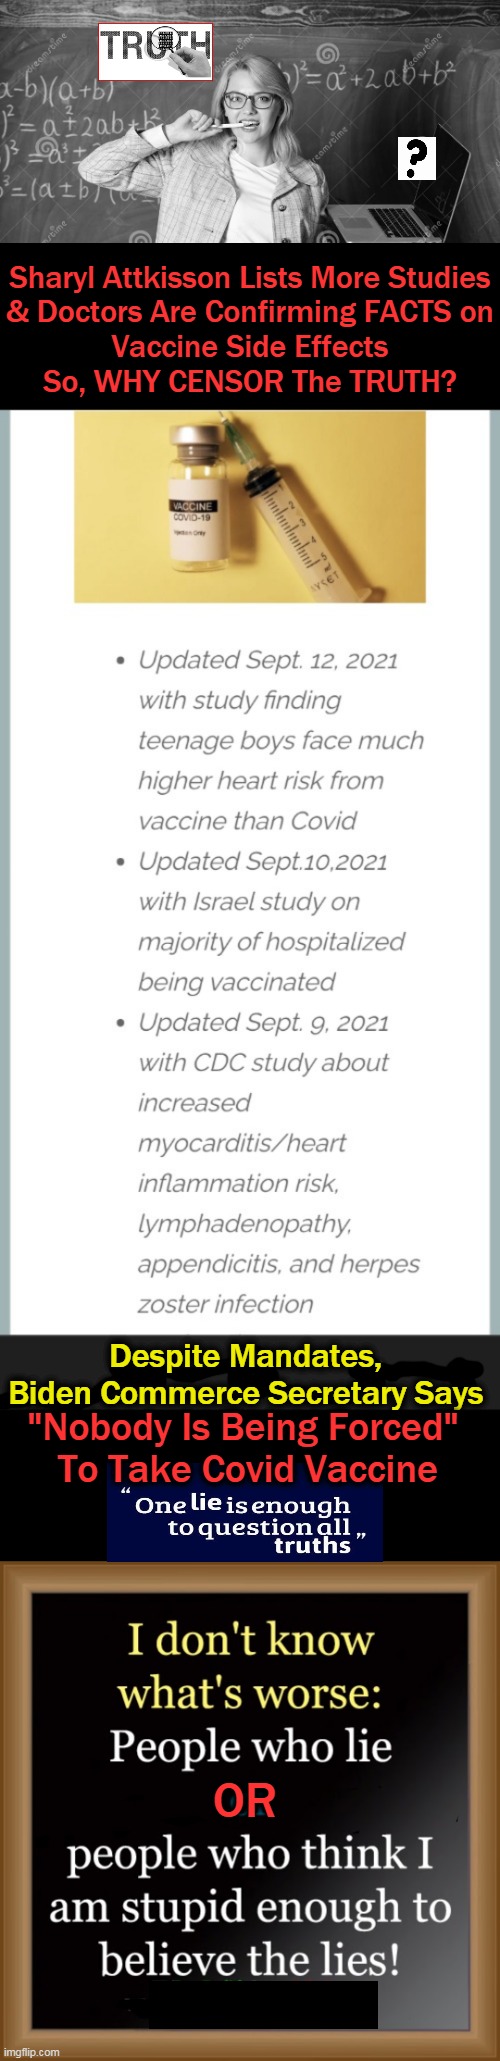 endorsement from 57 authors from 17 countries urging that Covid-19 jabs be stopped... |  Sharyl Attkisson Lists More Studies
& Doctors Are Confirming FACTS on
Vaccine Side Effects
So, WHY CENSOR The TRUTH? Despite Mandates, 
Biden Commerce Secretary Says; "Nobody Is Being Forced" 
To Take Covid Vaccine; OR | image tagged in politics,covid-19,vaccine side effects,facts,studies,actual cases | made w/ Imgflip meme maker